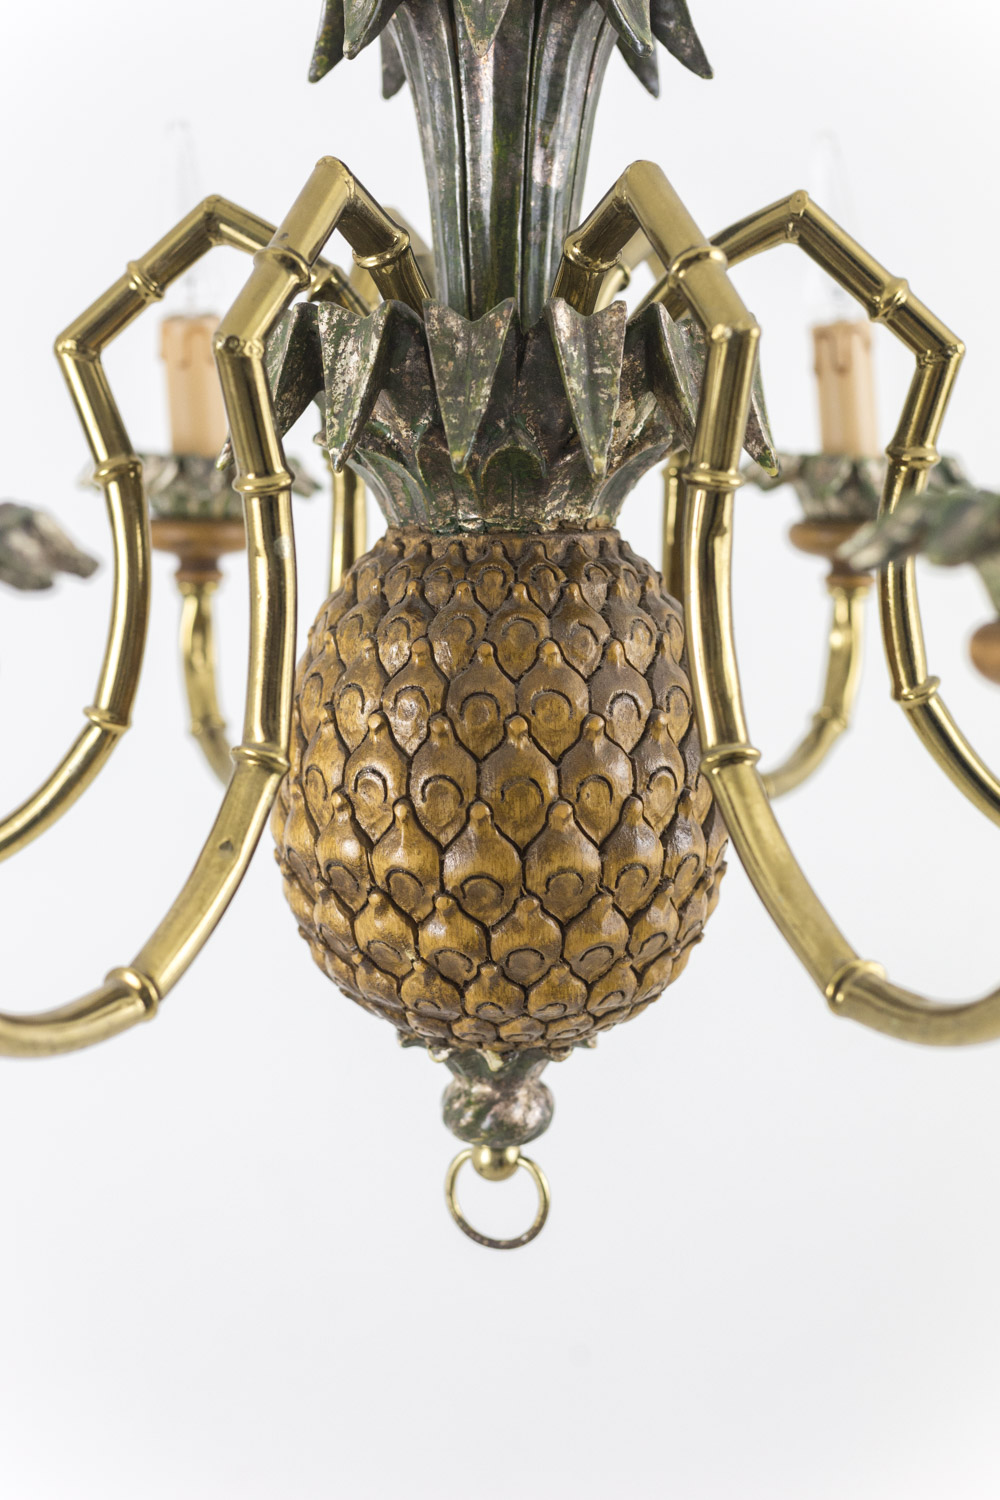 Pineapple chandelier in lacquered wood and gilt brass, 1950's